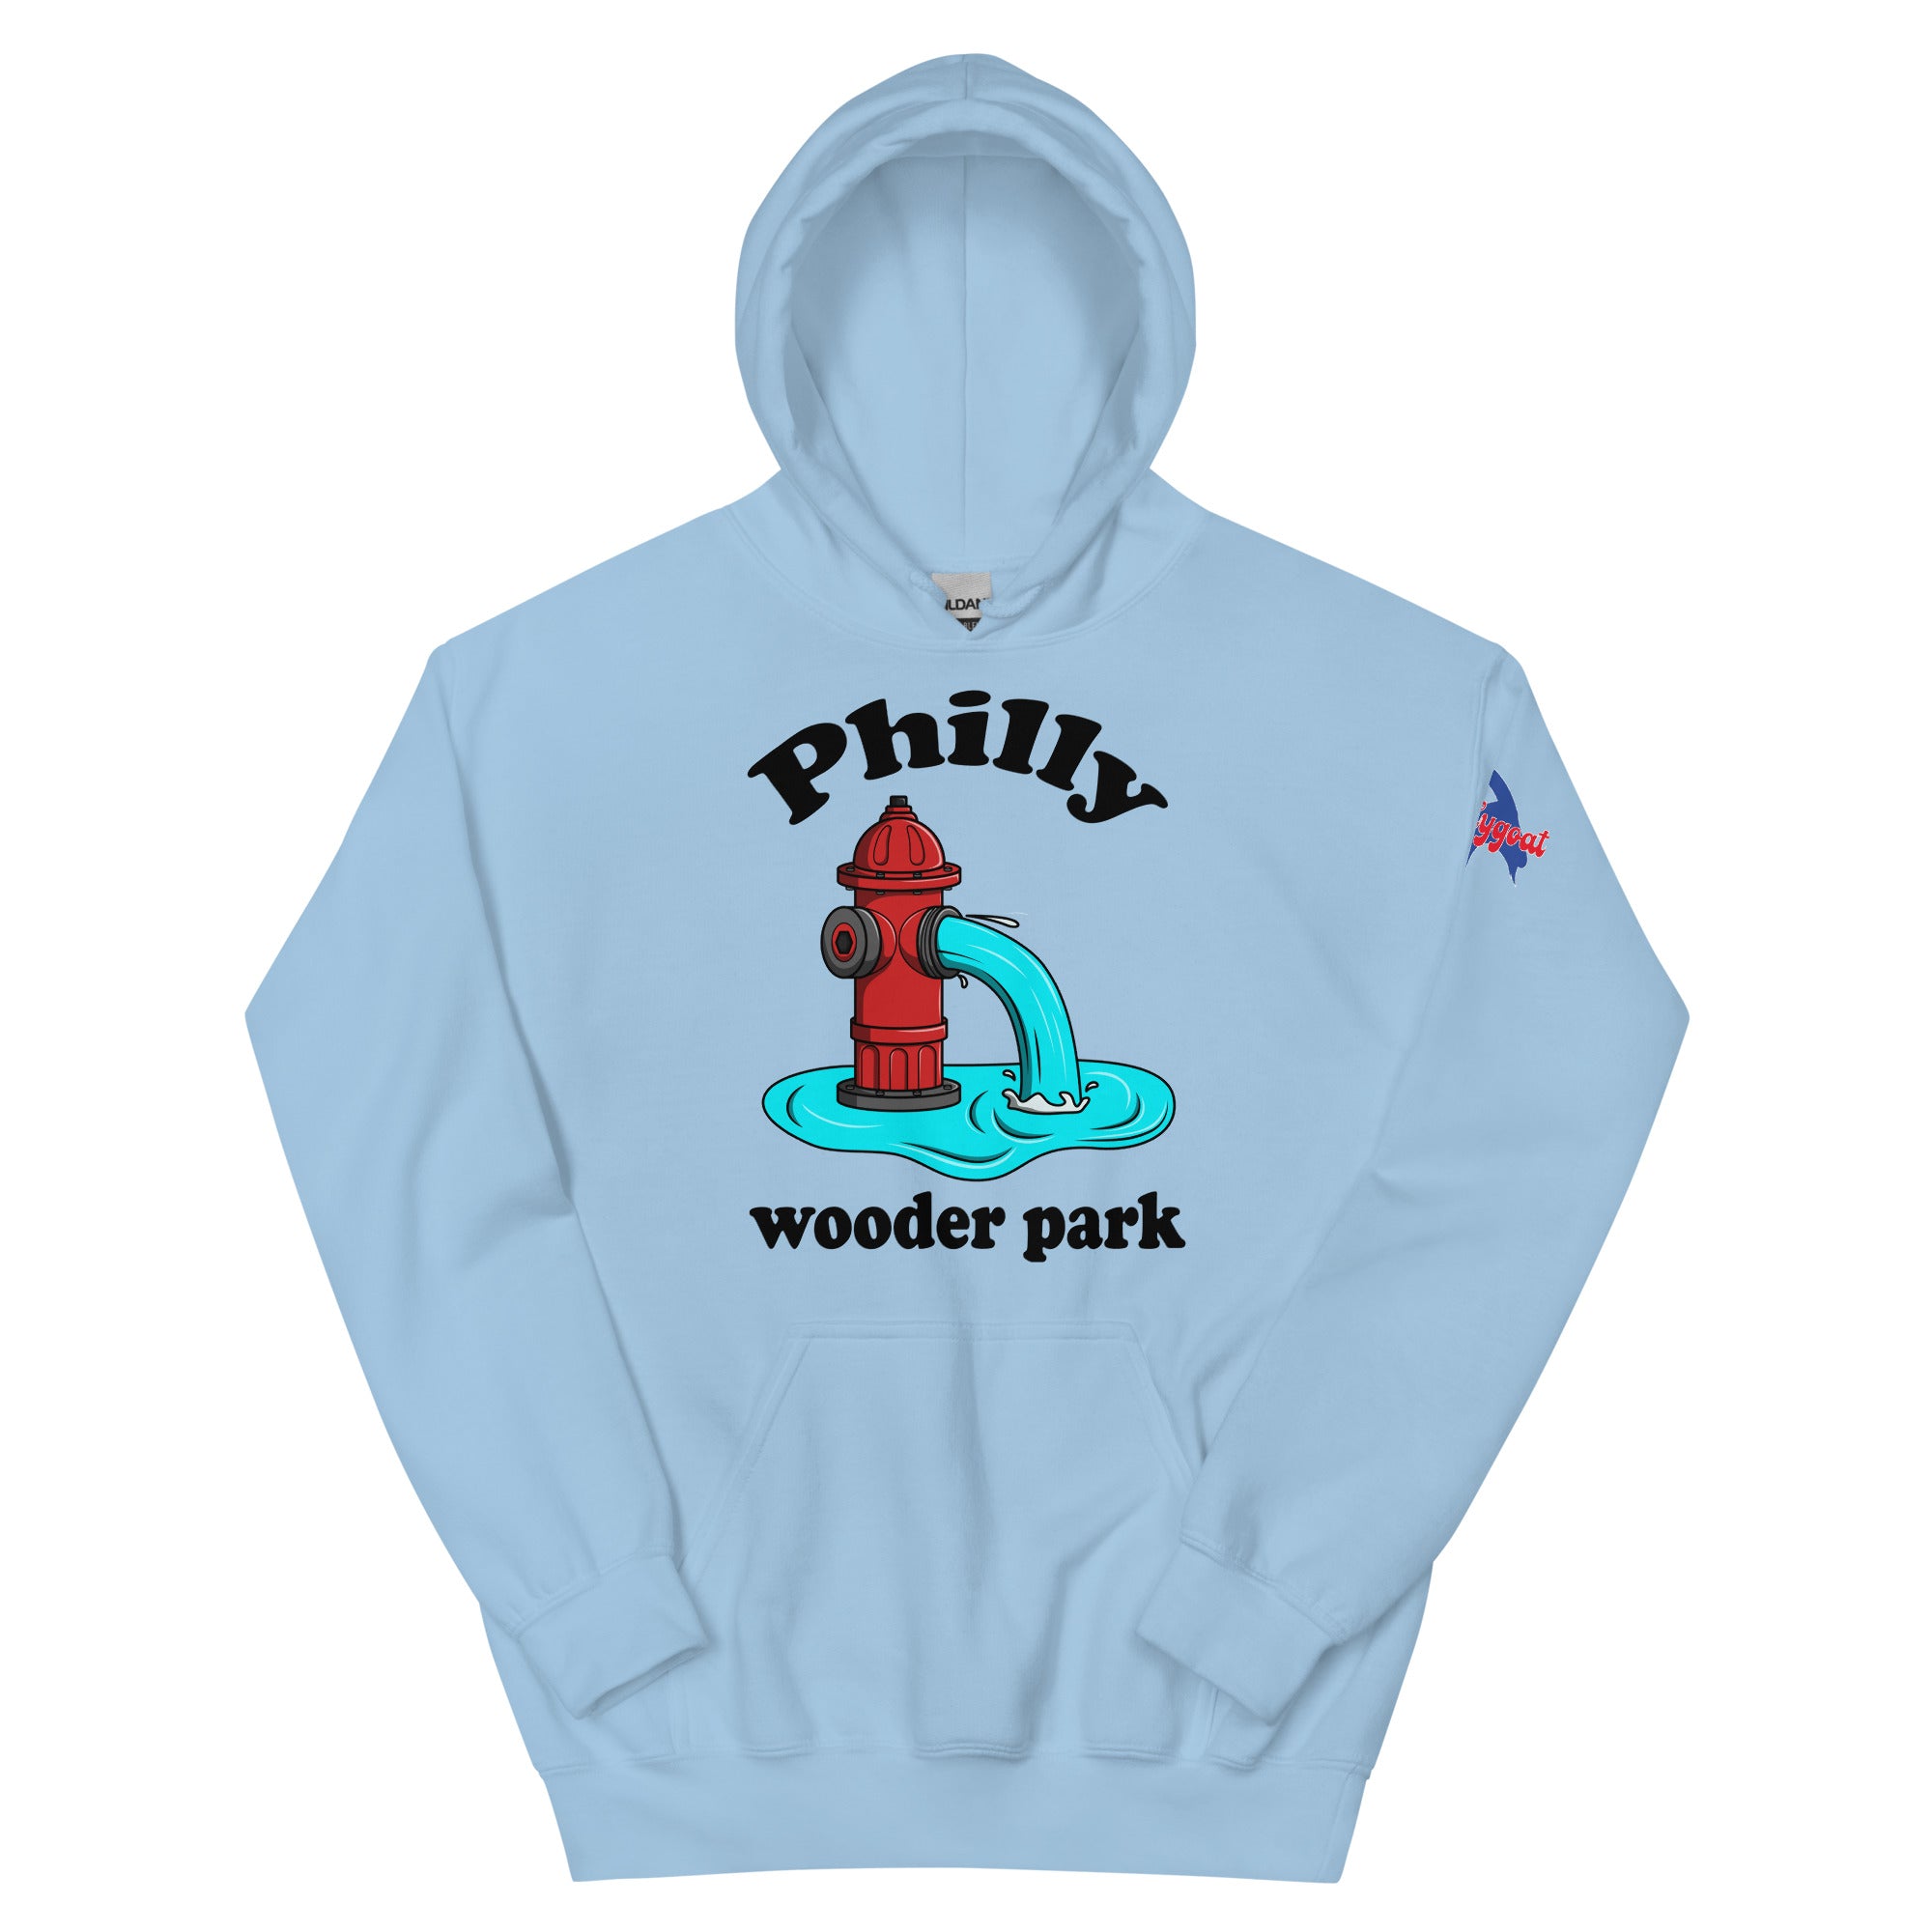 Philadelphia Philly wooder park water park fire hydrant funny light blue hoodie from Phillygoat